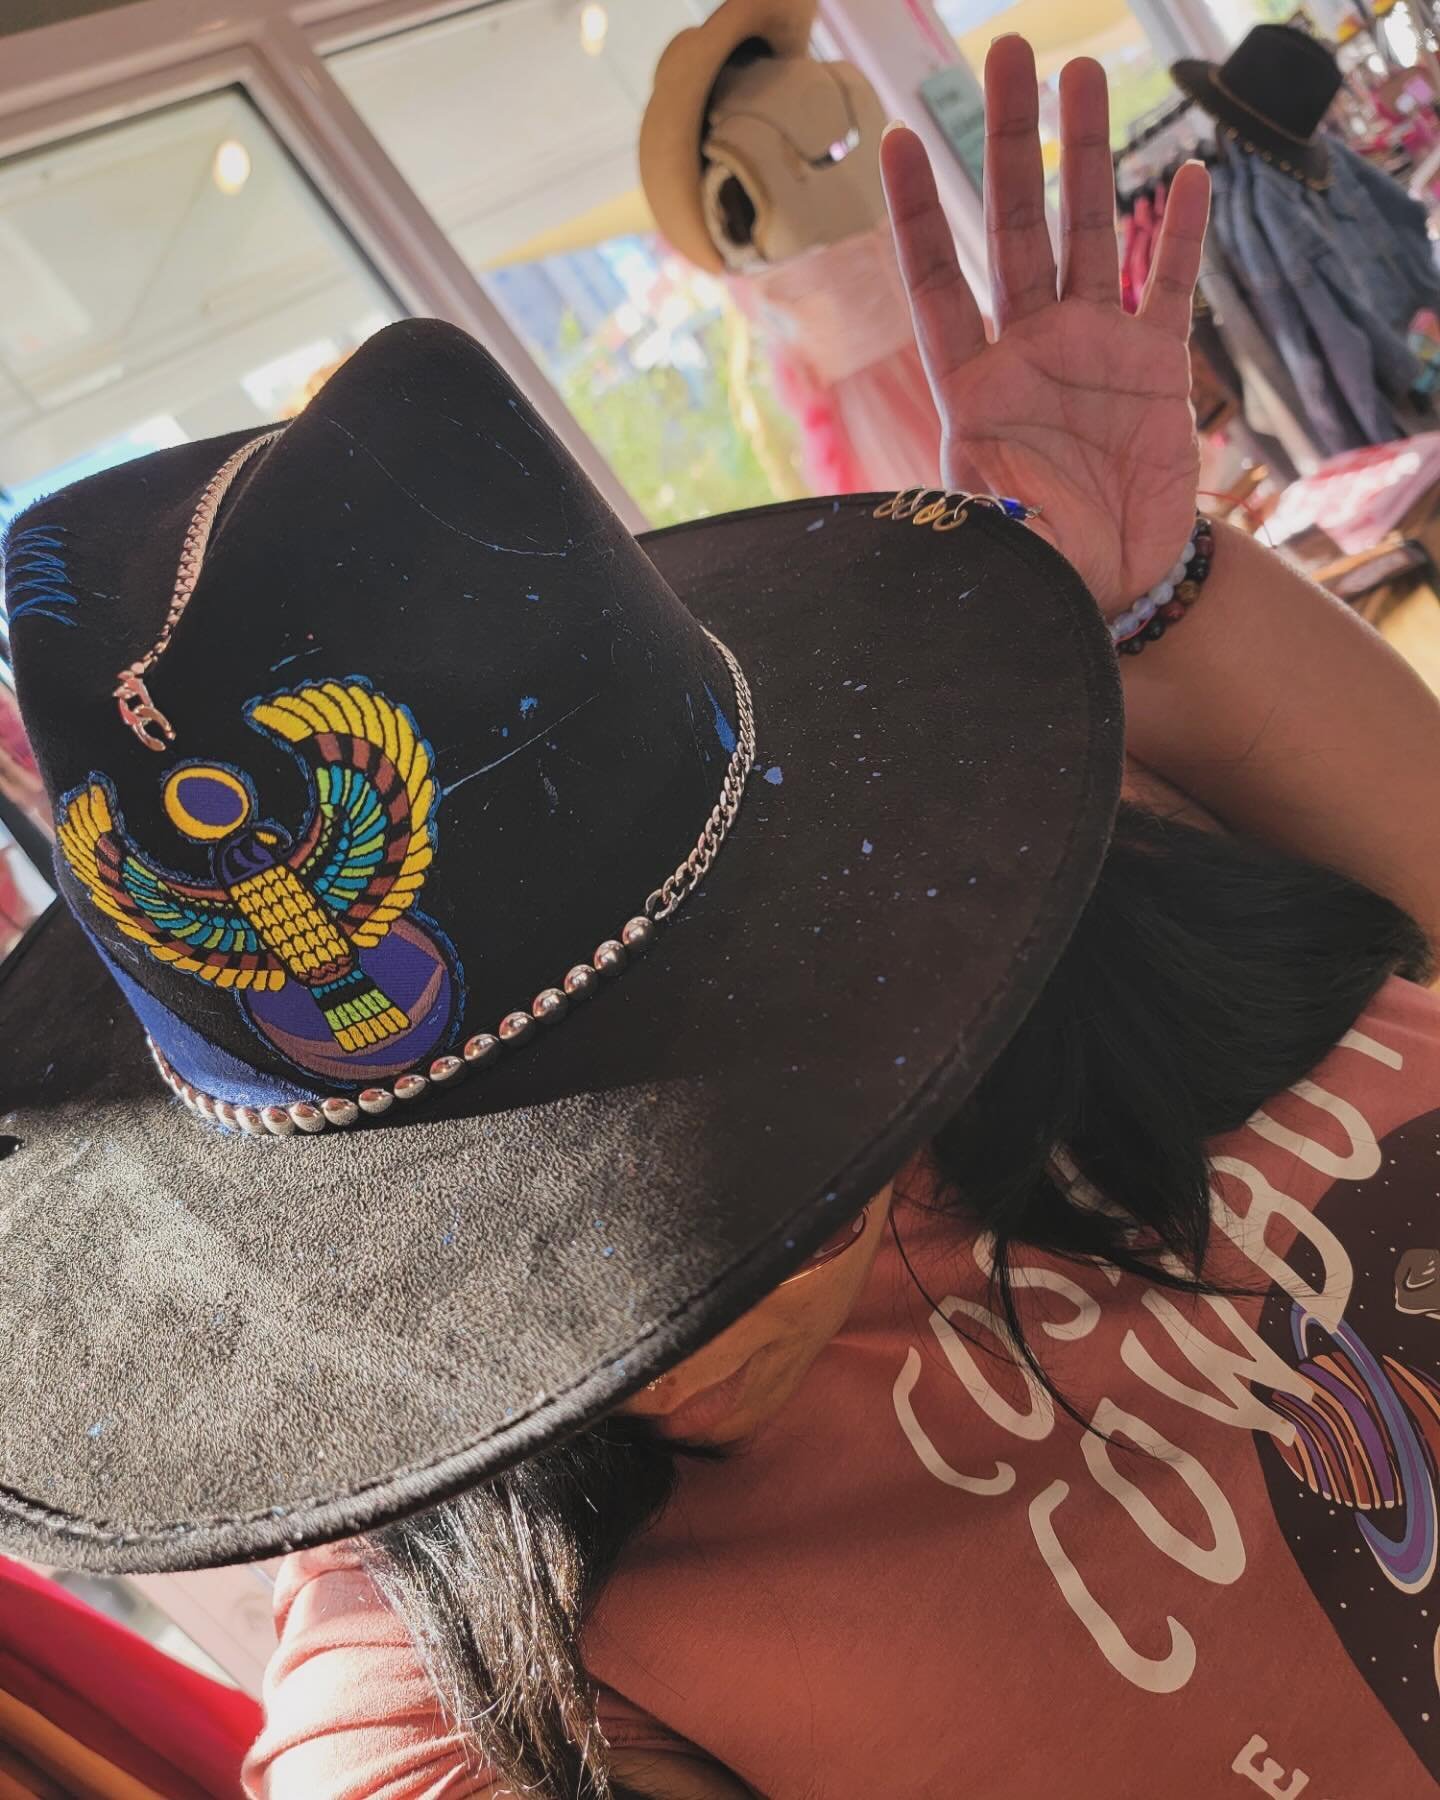 Vegas flair. We love all our vibrant hats with so much character. #hatbar #hats #vegasbaby